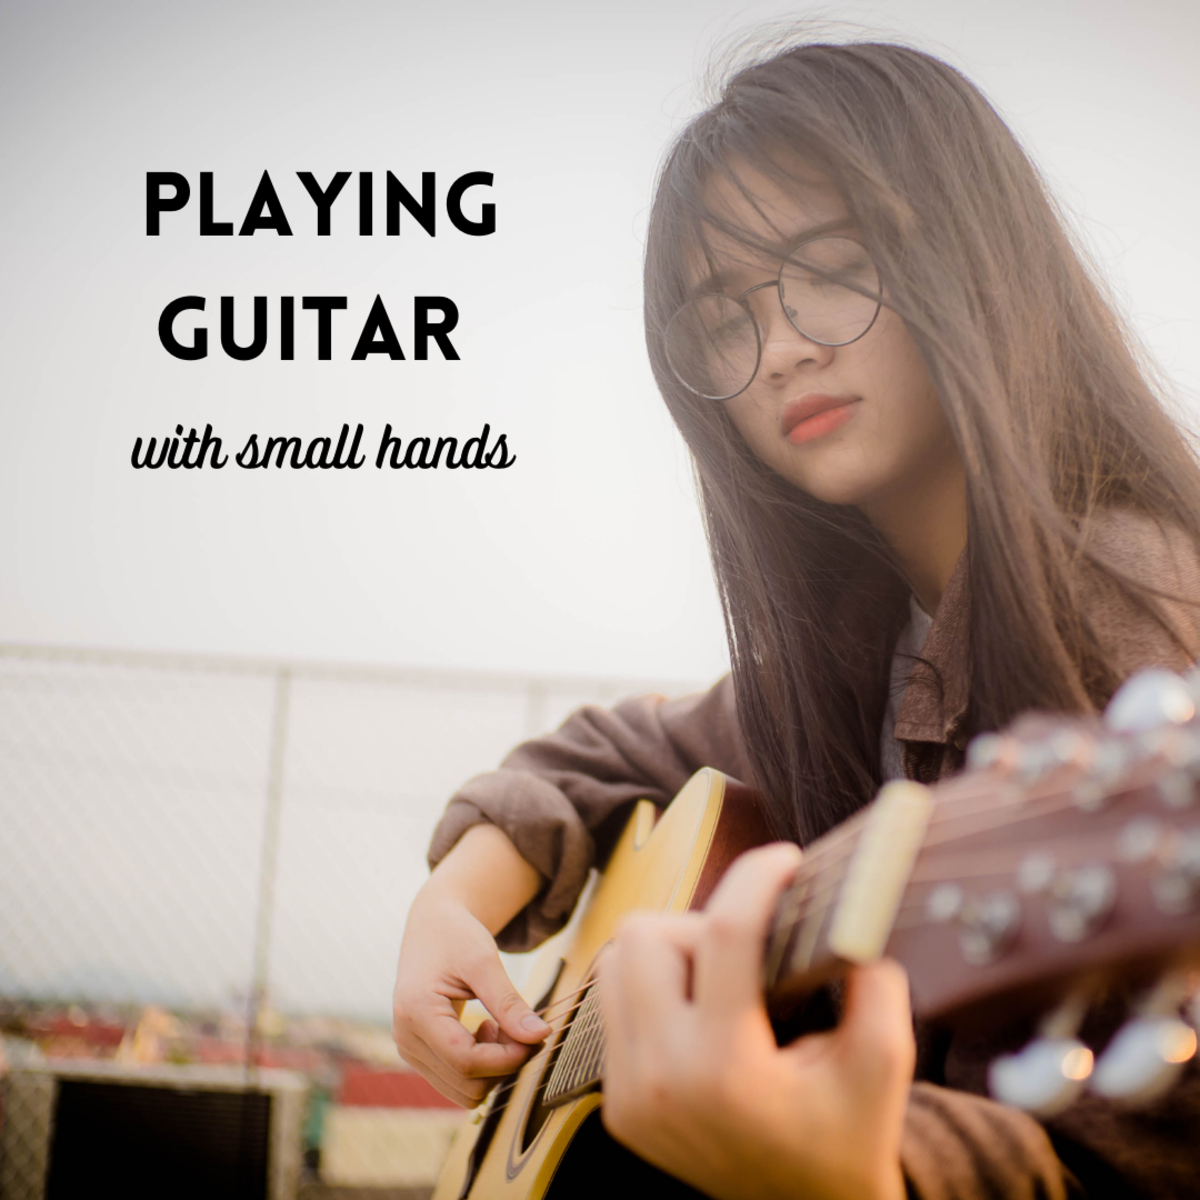 Eight Great Tips for Playing Guitar With Small Hands